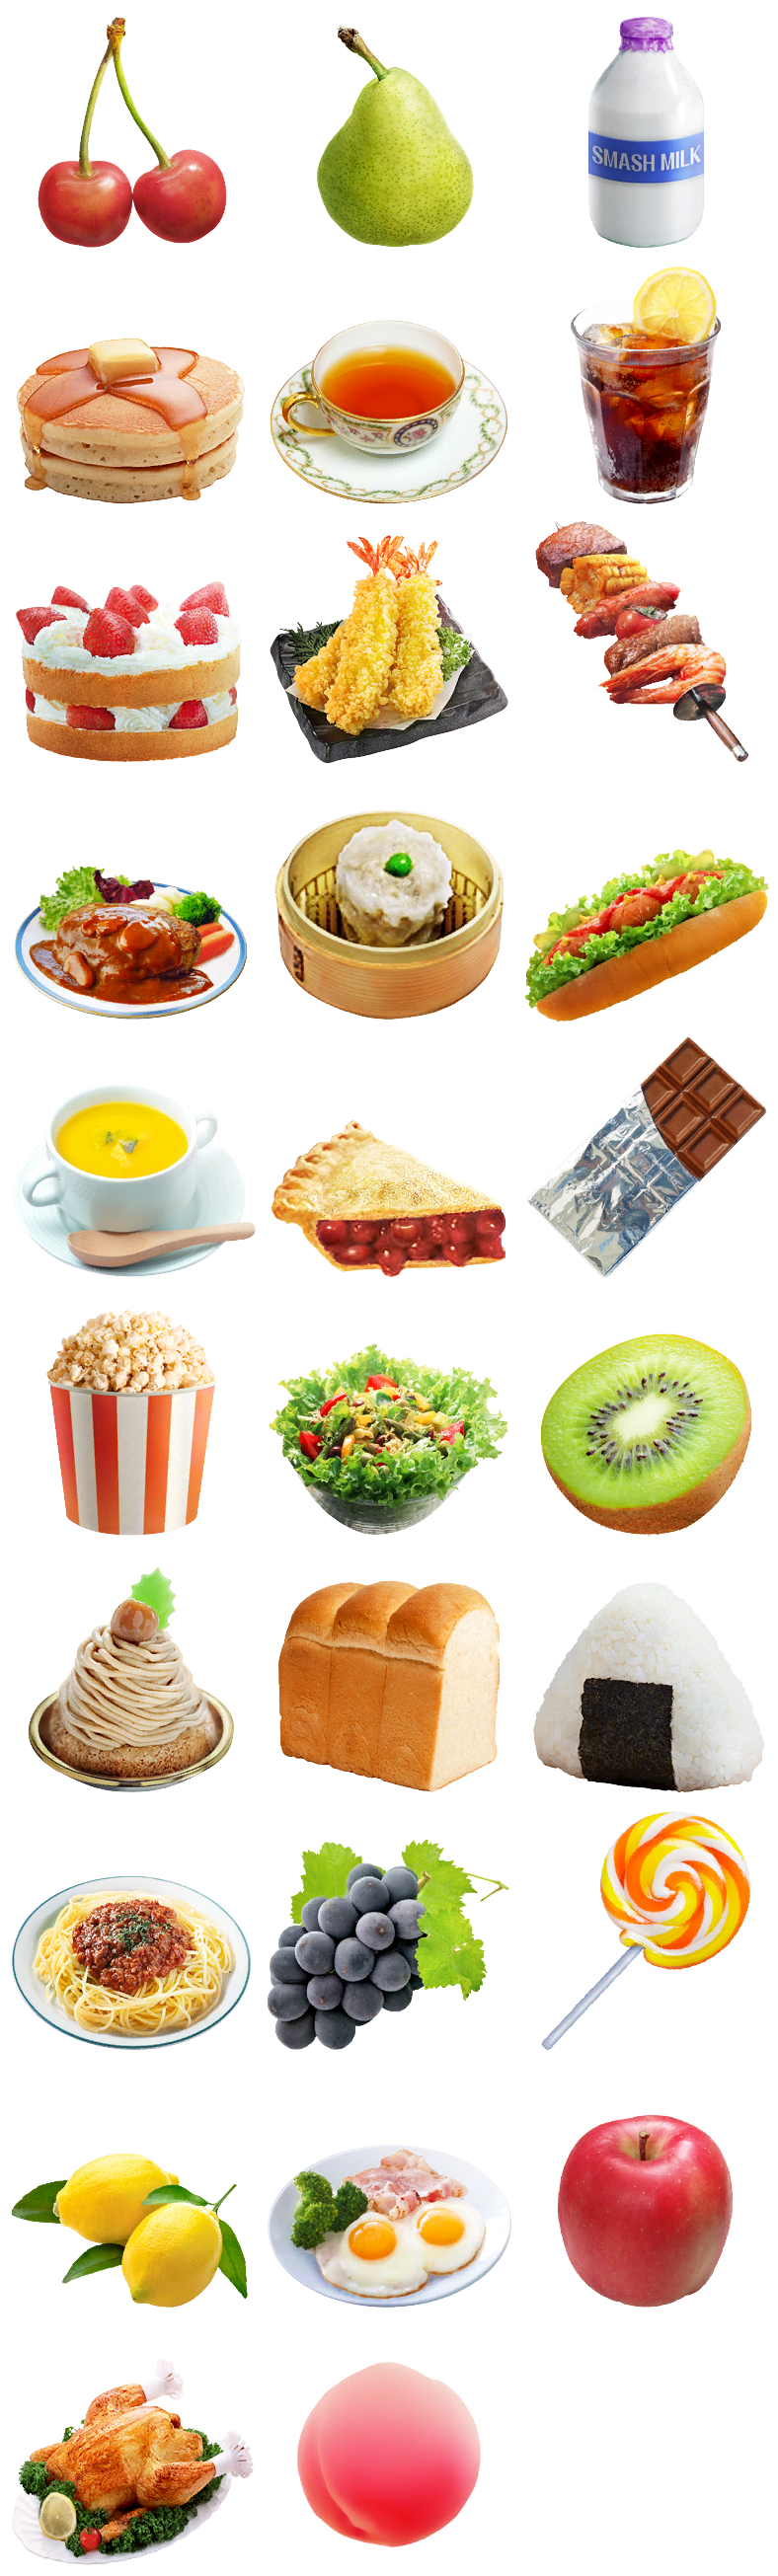 meal clipart western food